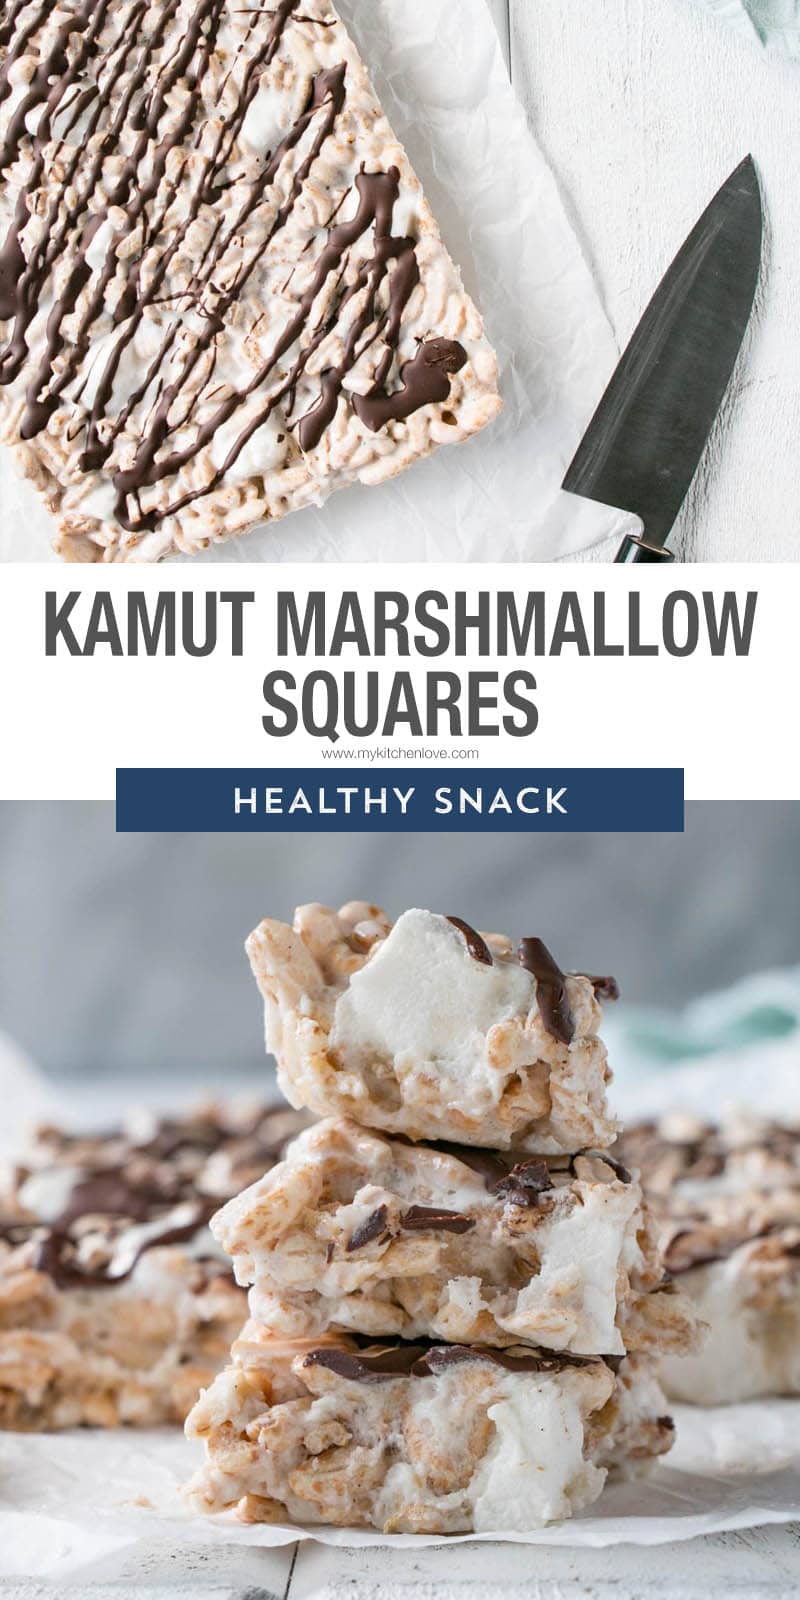 10 nut-free and healthy snacks with some healthier Puffed Wheat Squares. This is a fun Kamut recipe that kids love!! via @mykitchenlove